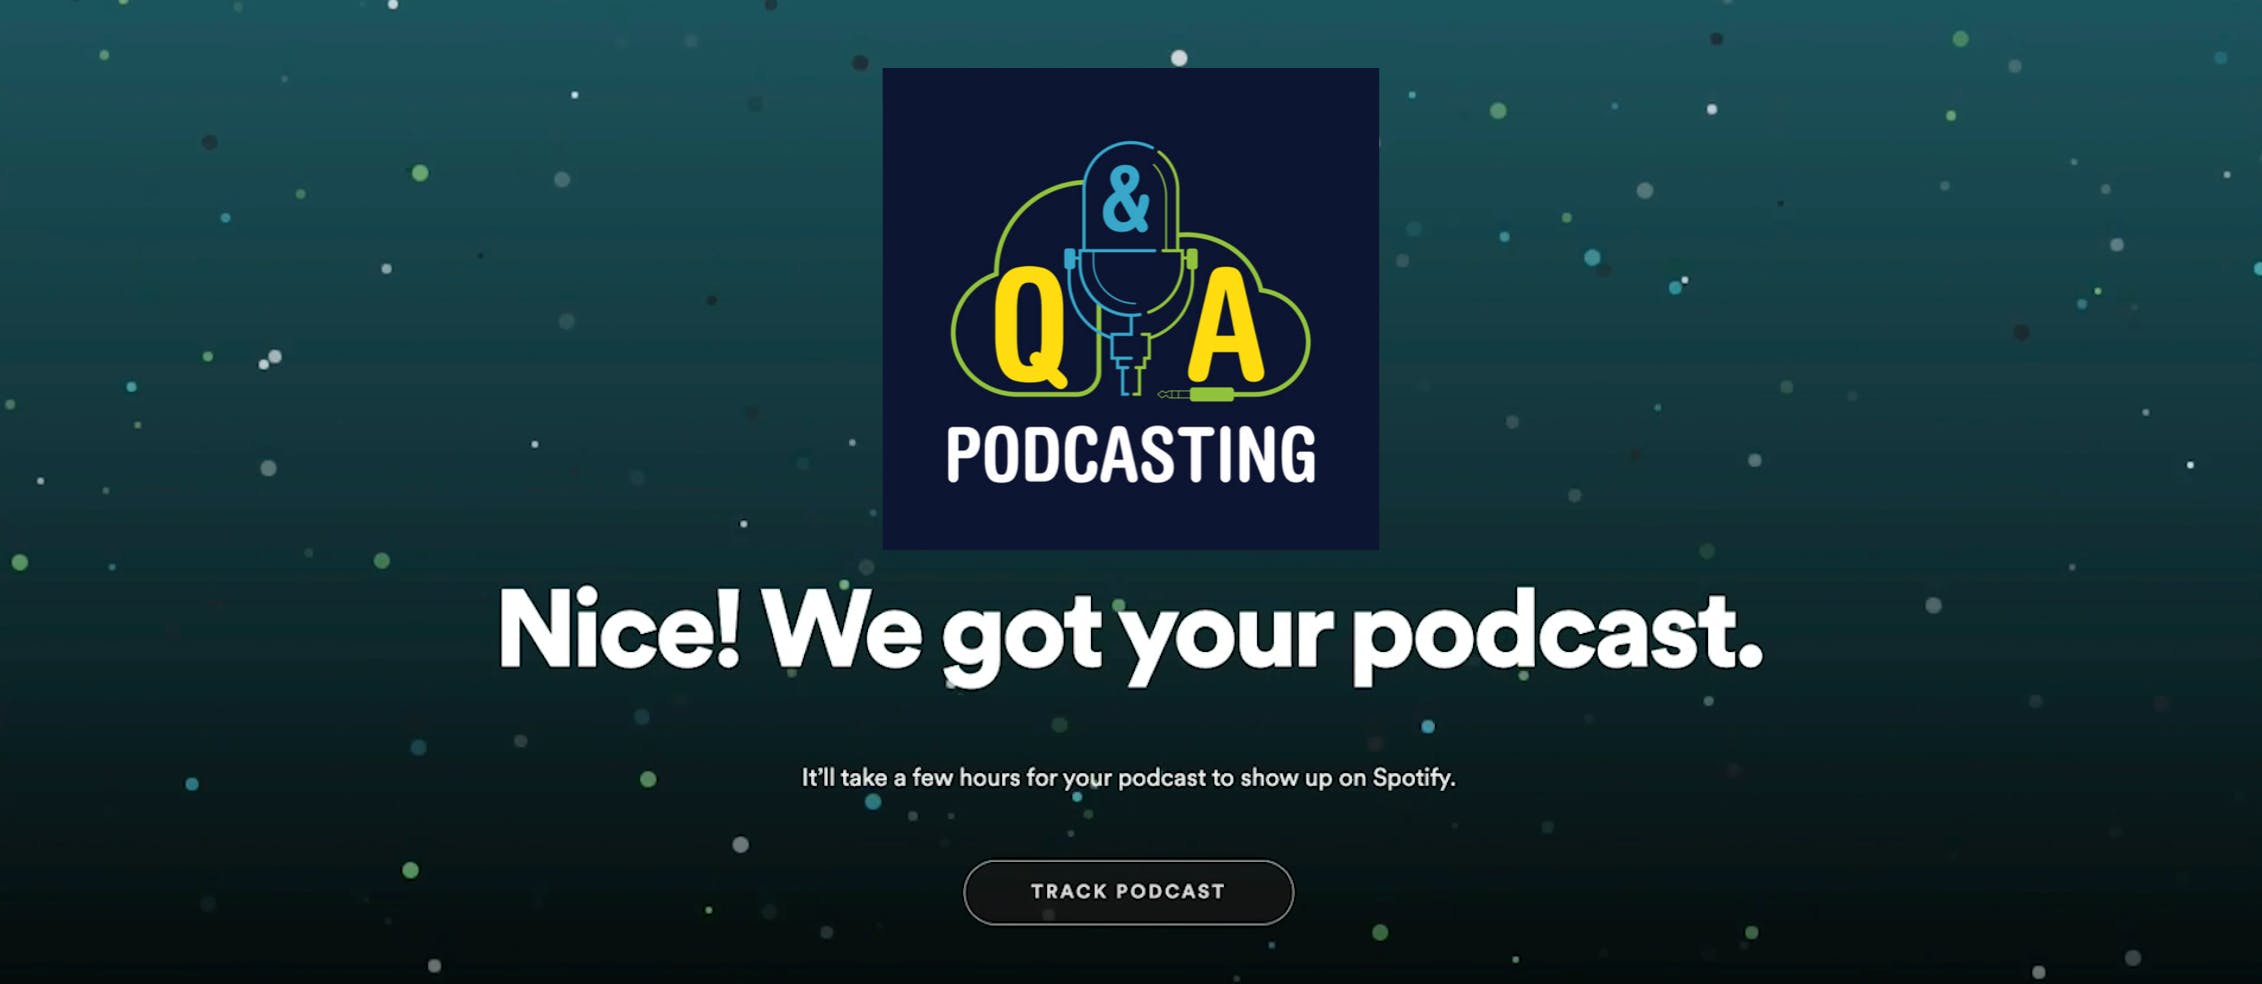 How to Make a Podcast on Spotify